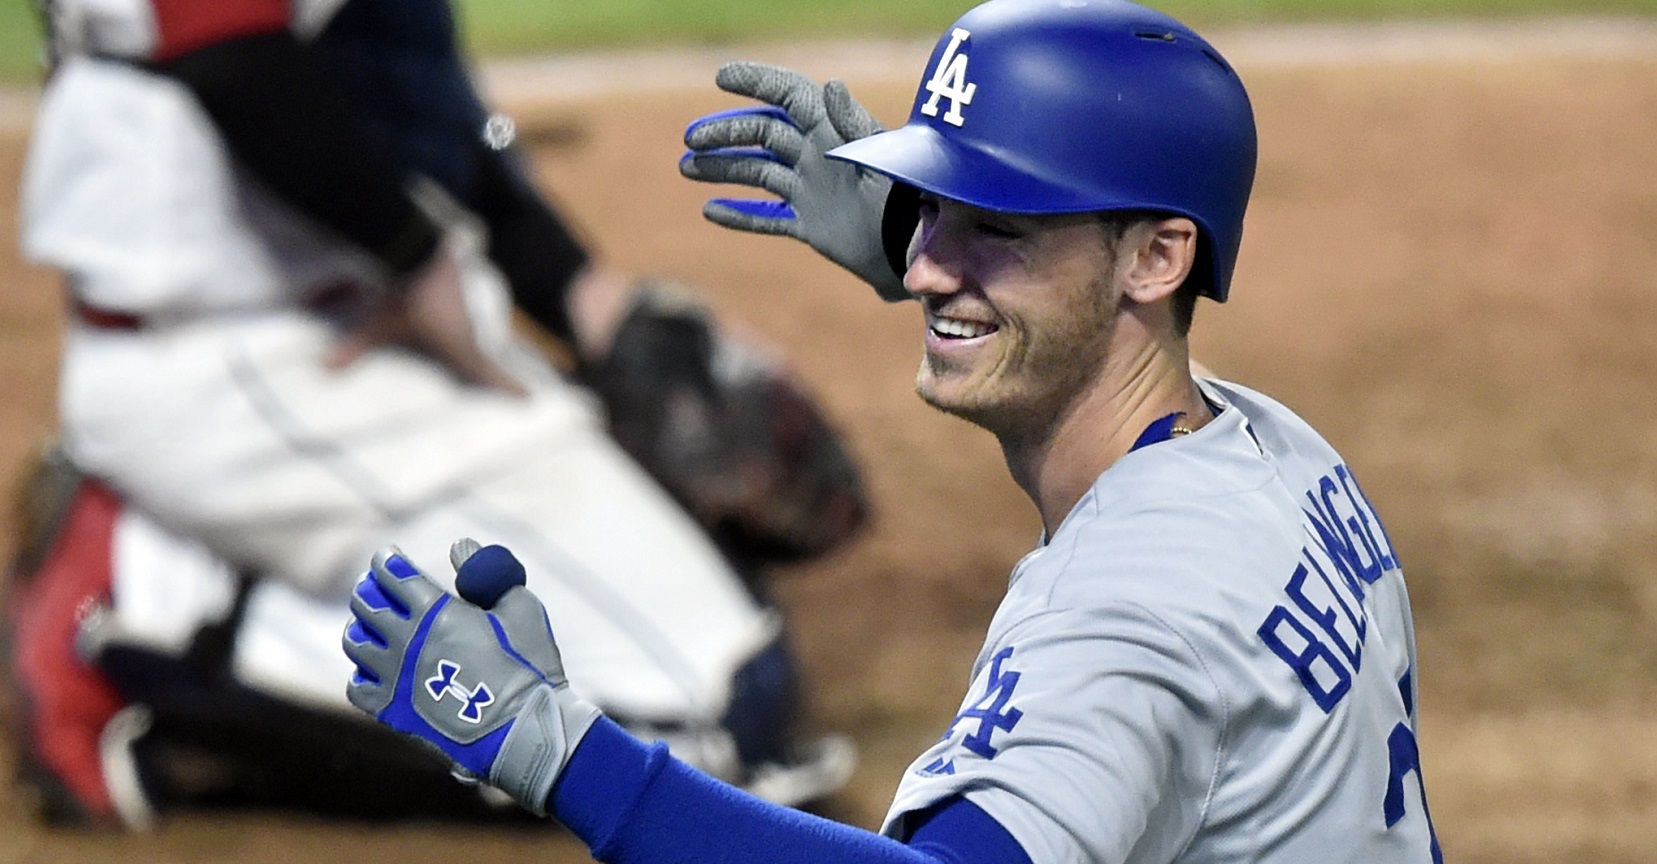 Cody Bellinger’s two-HR night puts the Dodgers’ rookie in the record book